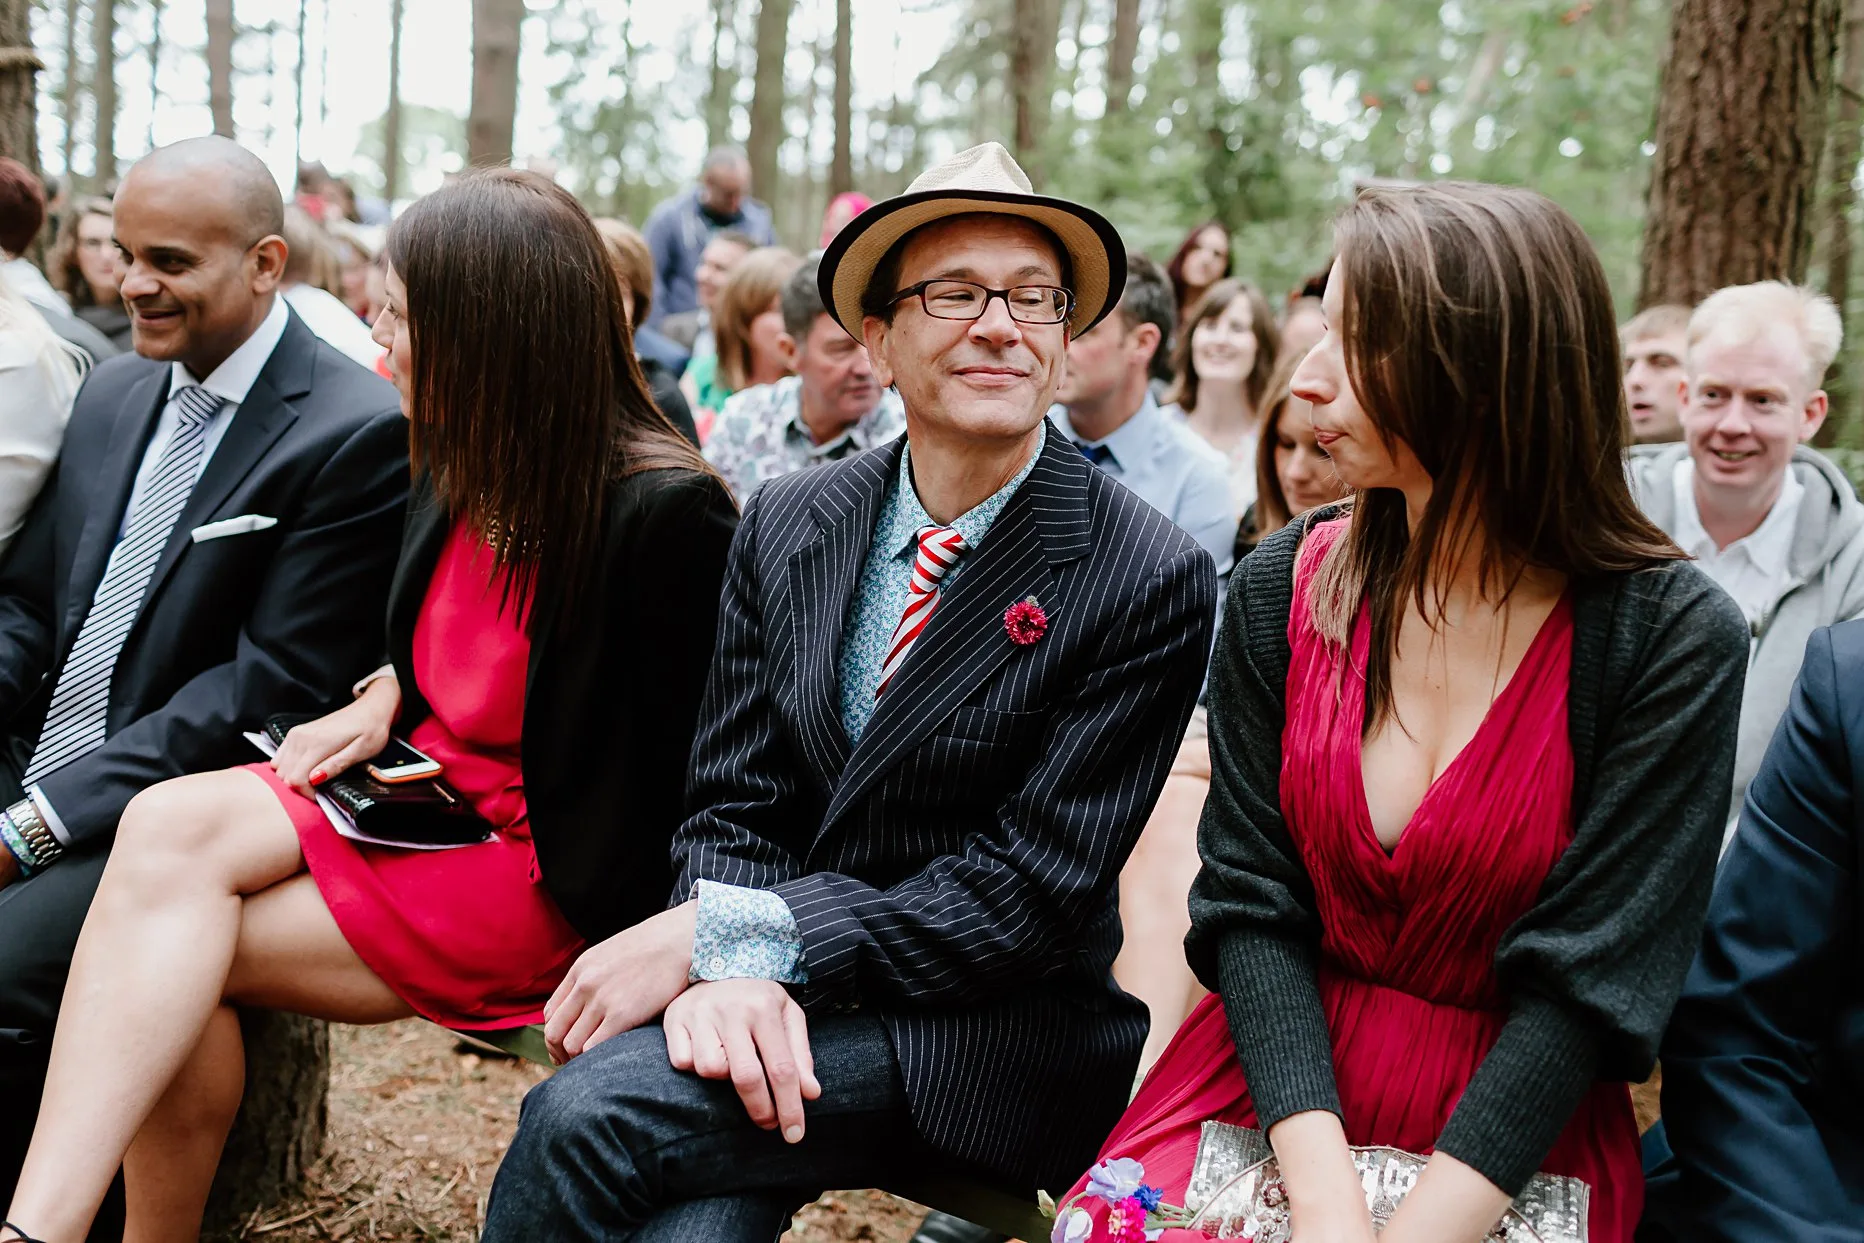 Wedding guests sat outside woodland chapel at camp katur waiting for the bride